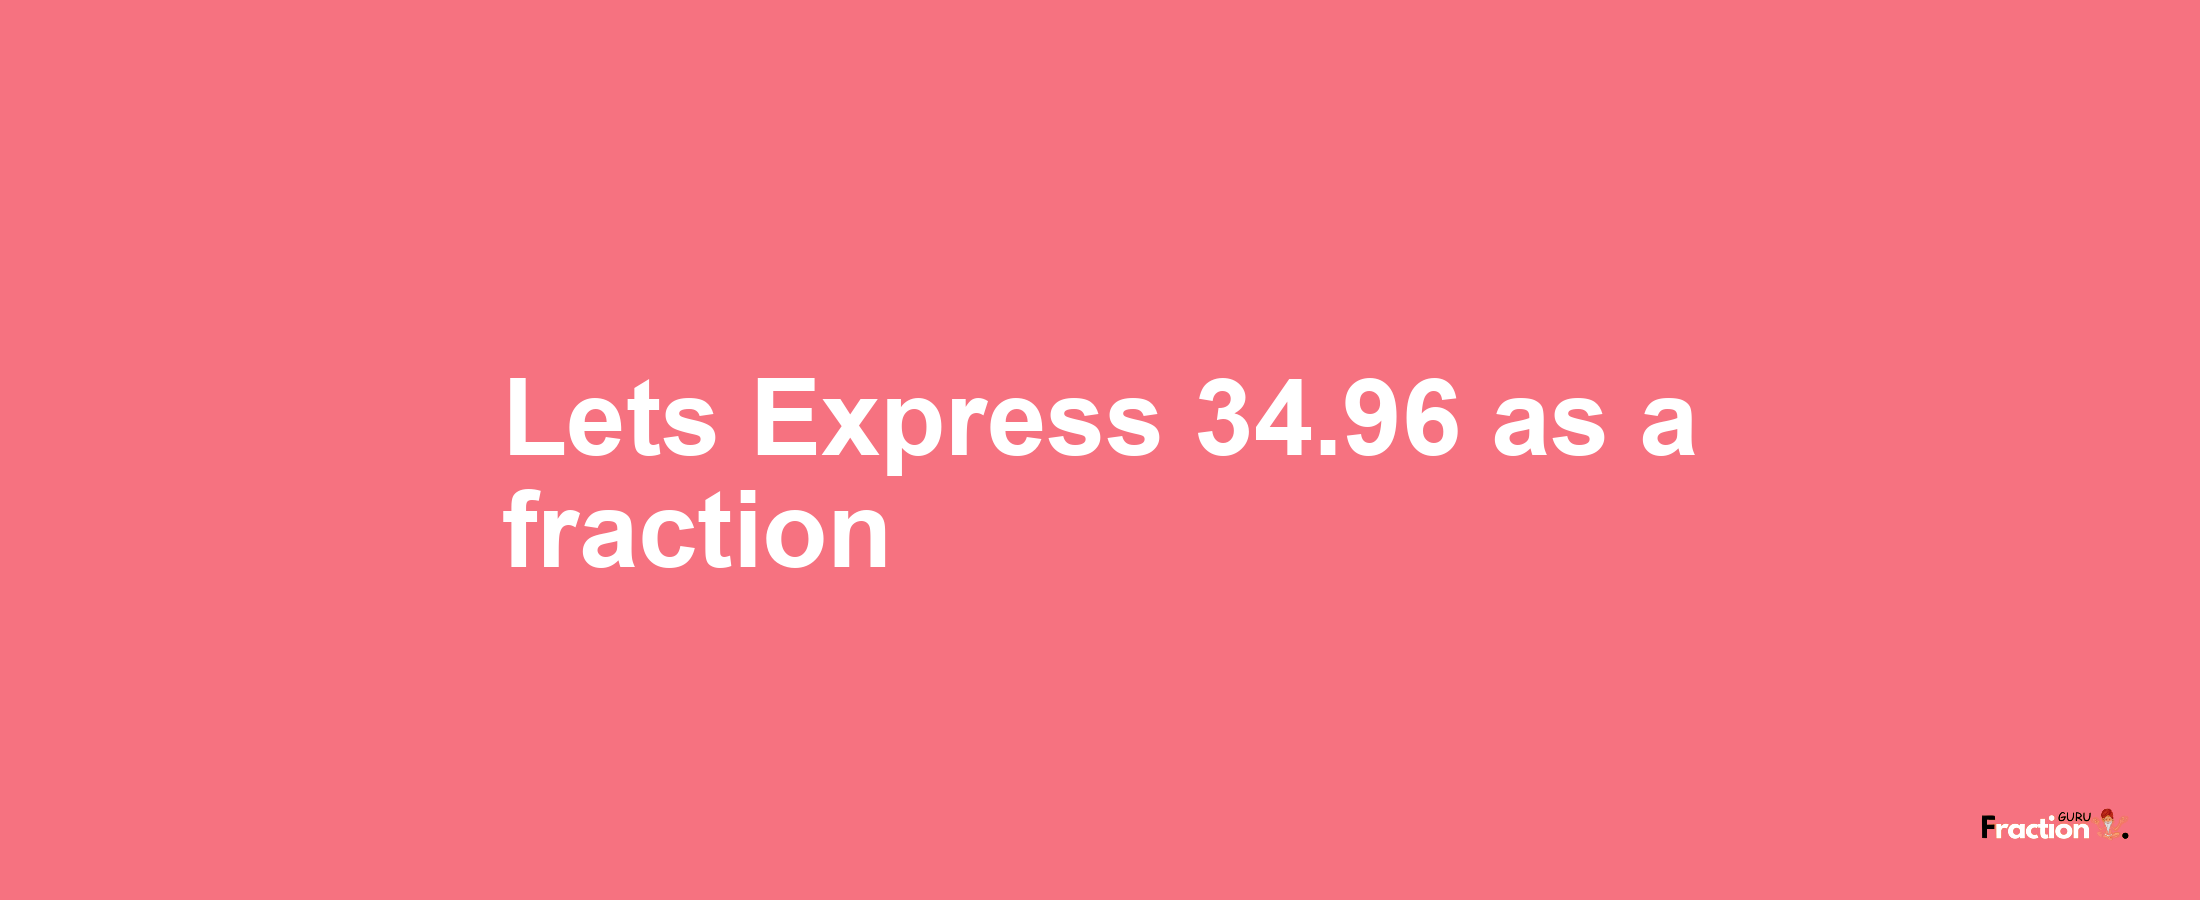 Lets Express 34.96 as afraction